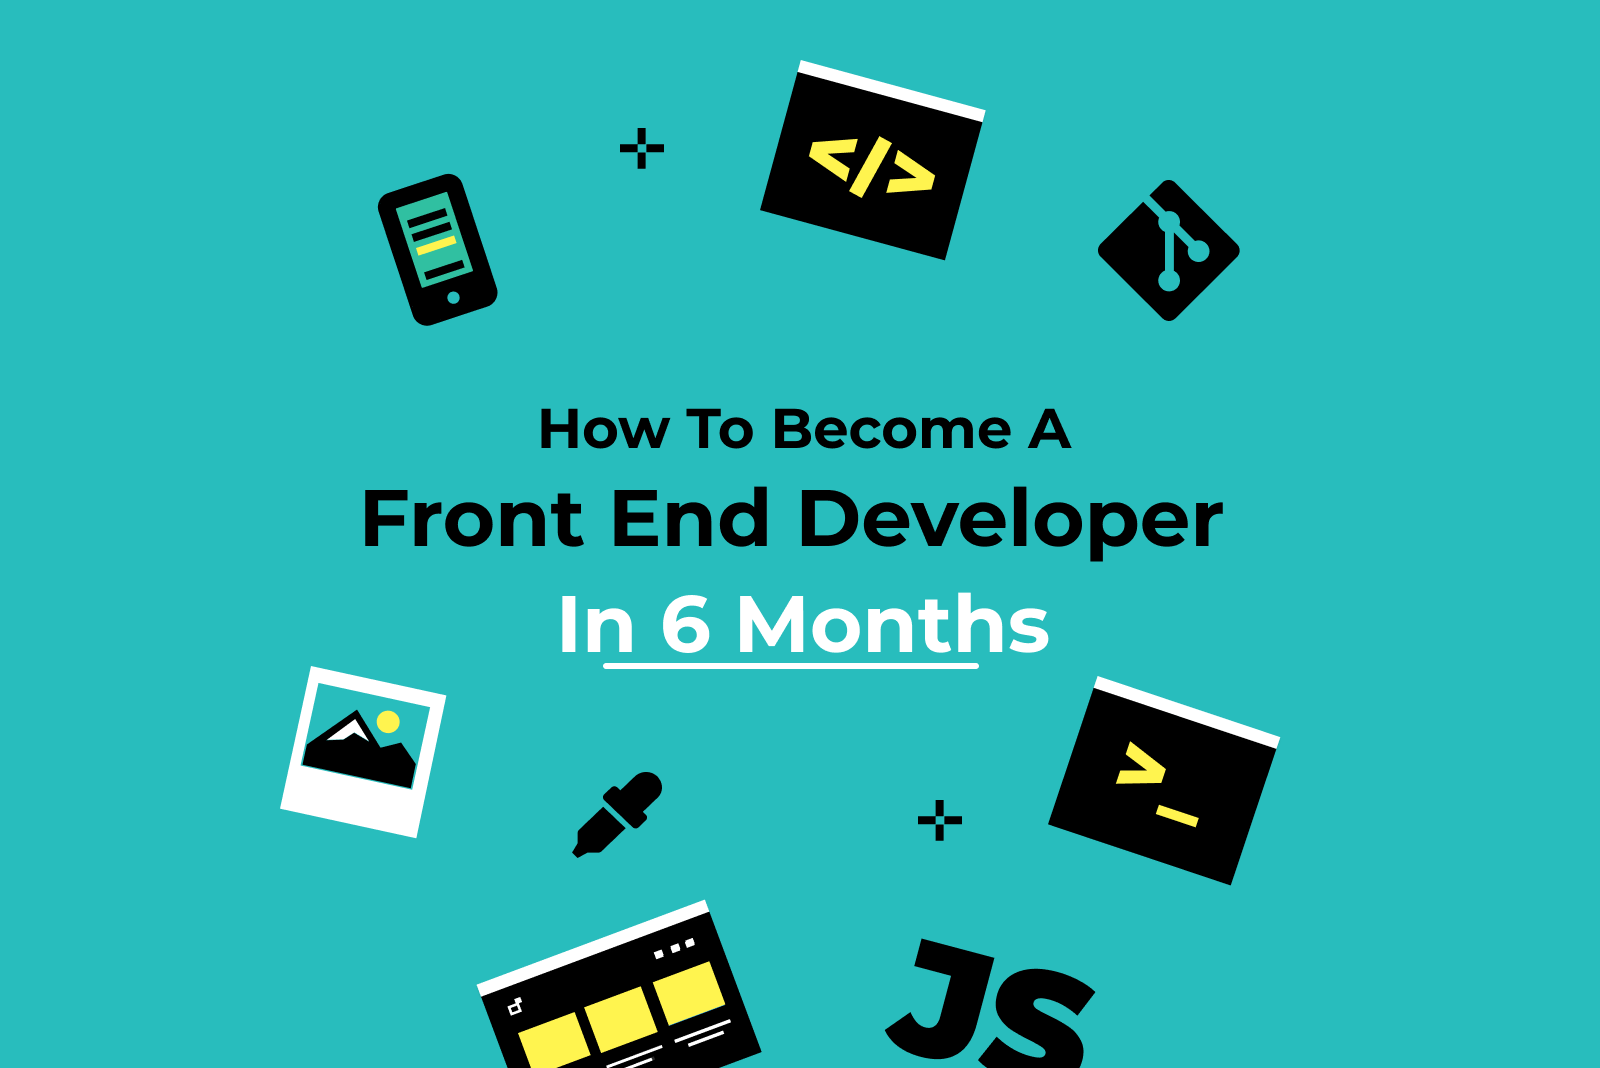 How To Become a Front End Developer in 6 Months